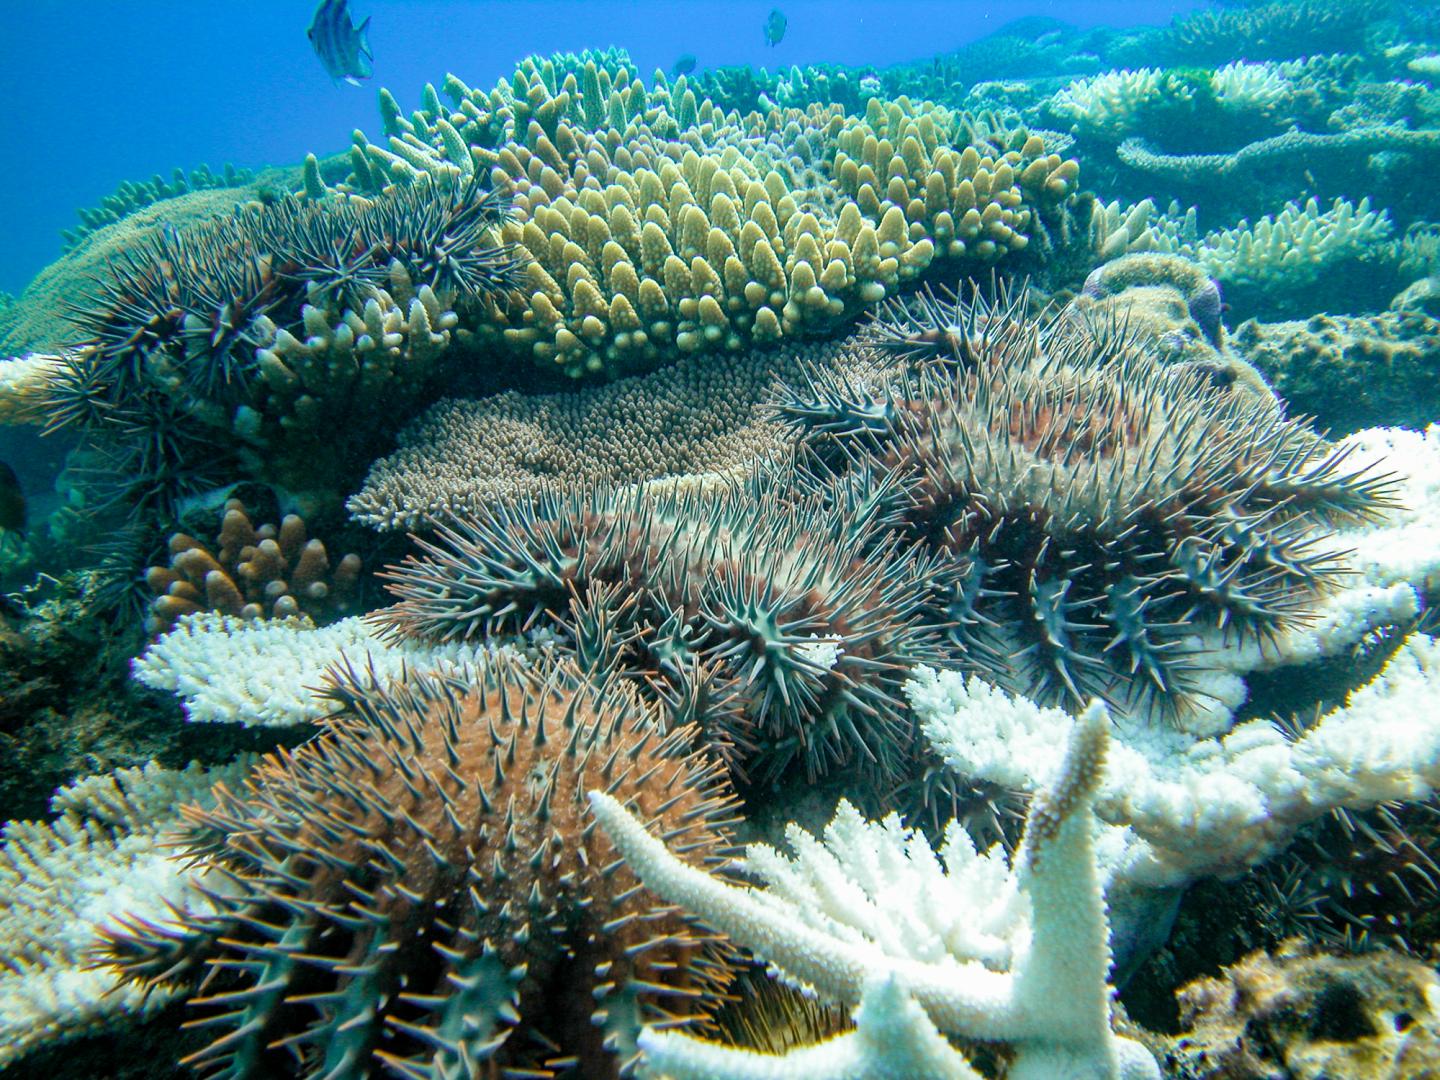 Crown-Of-Thorns Starfish Eating Coral on the Great Barrier Reef